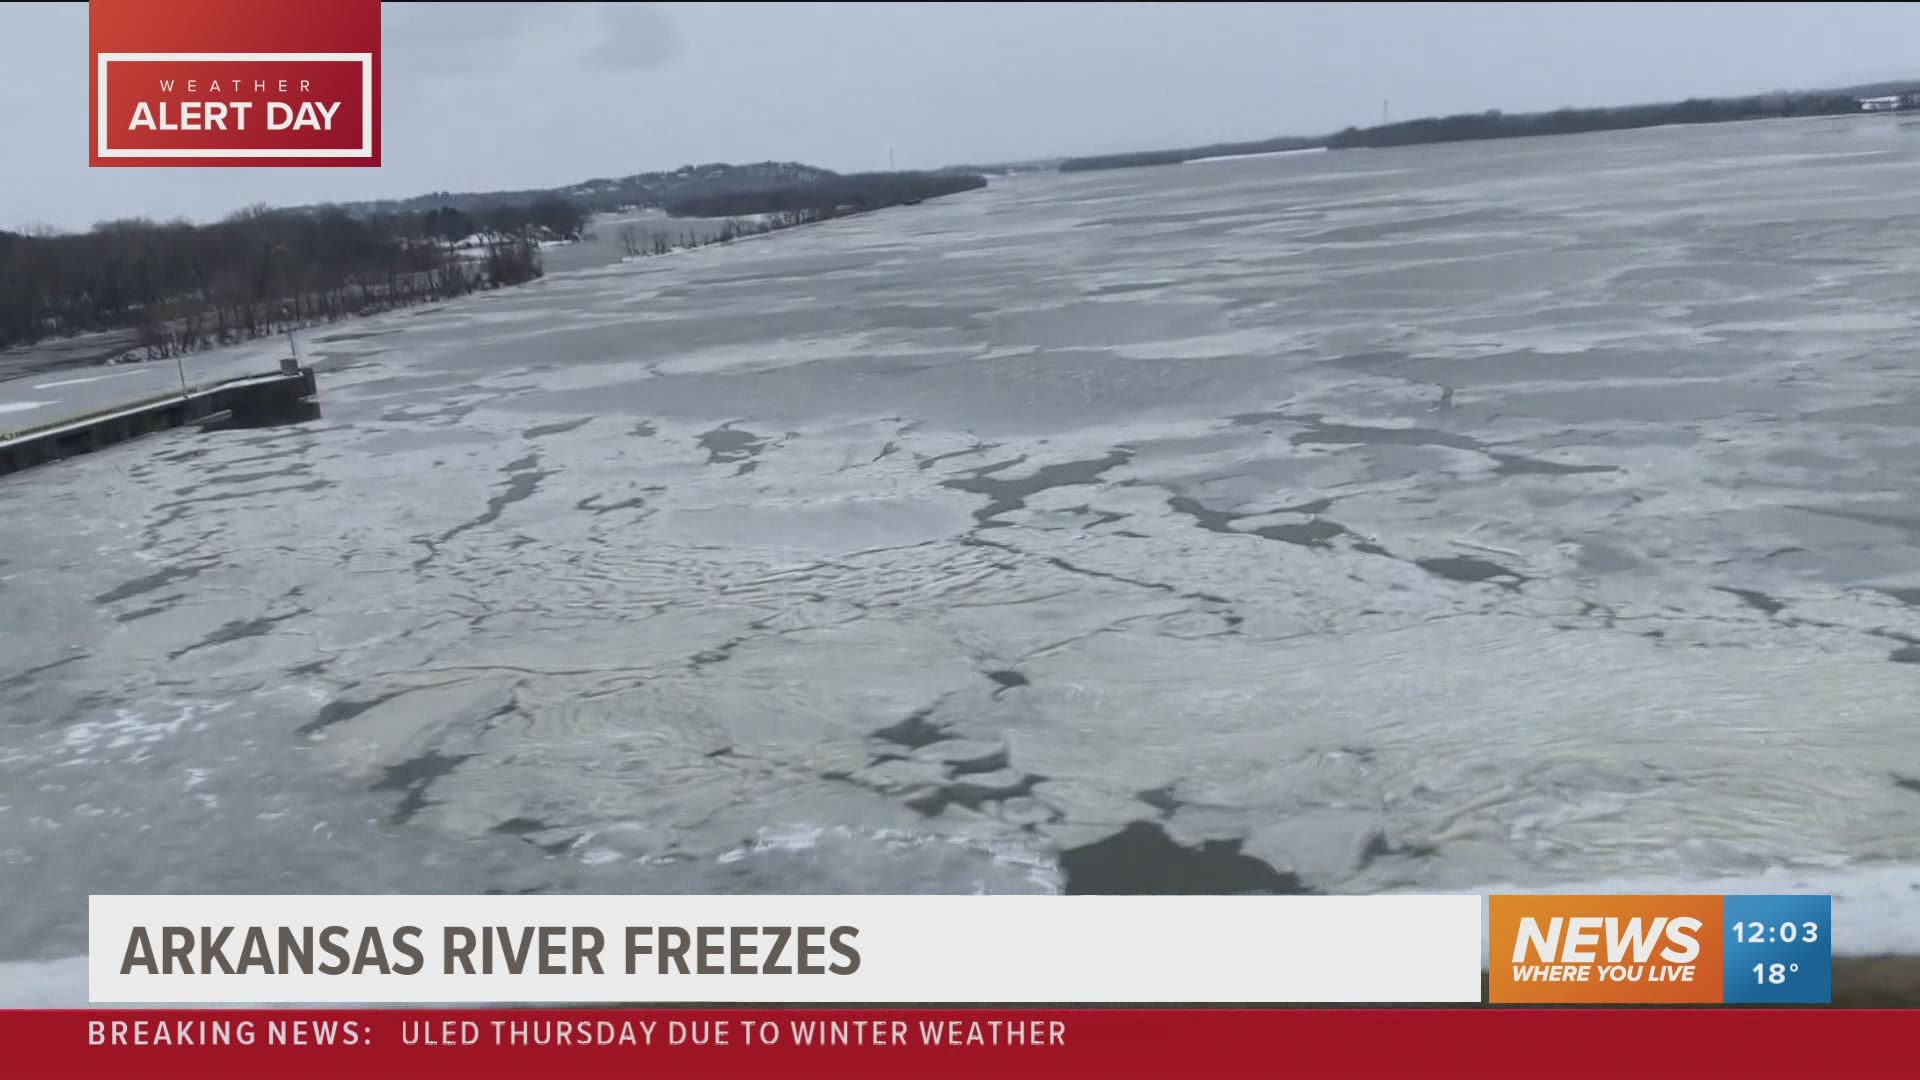 5NEWS visited the Barling Lock & Dam to see an unusual site - a frozen Arkansas River.